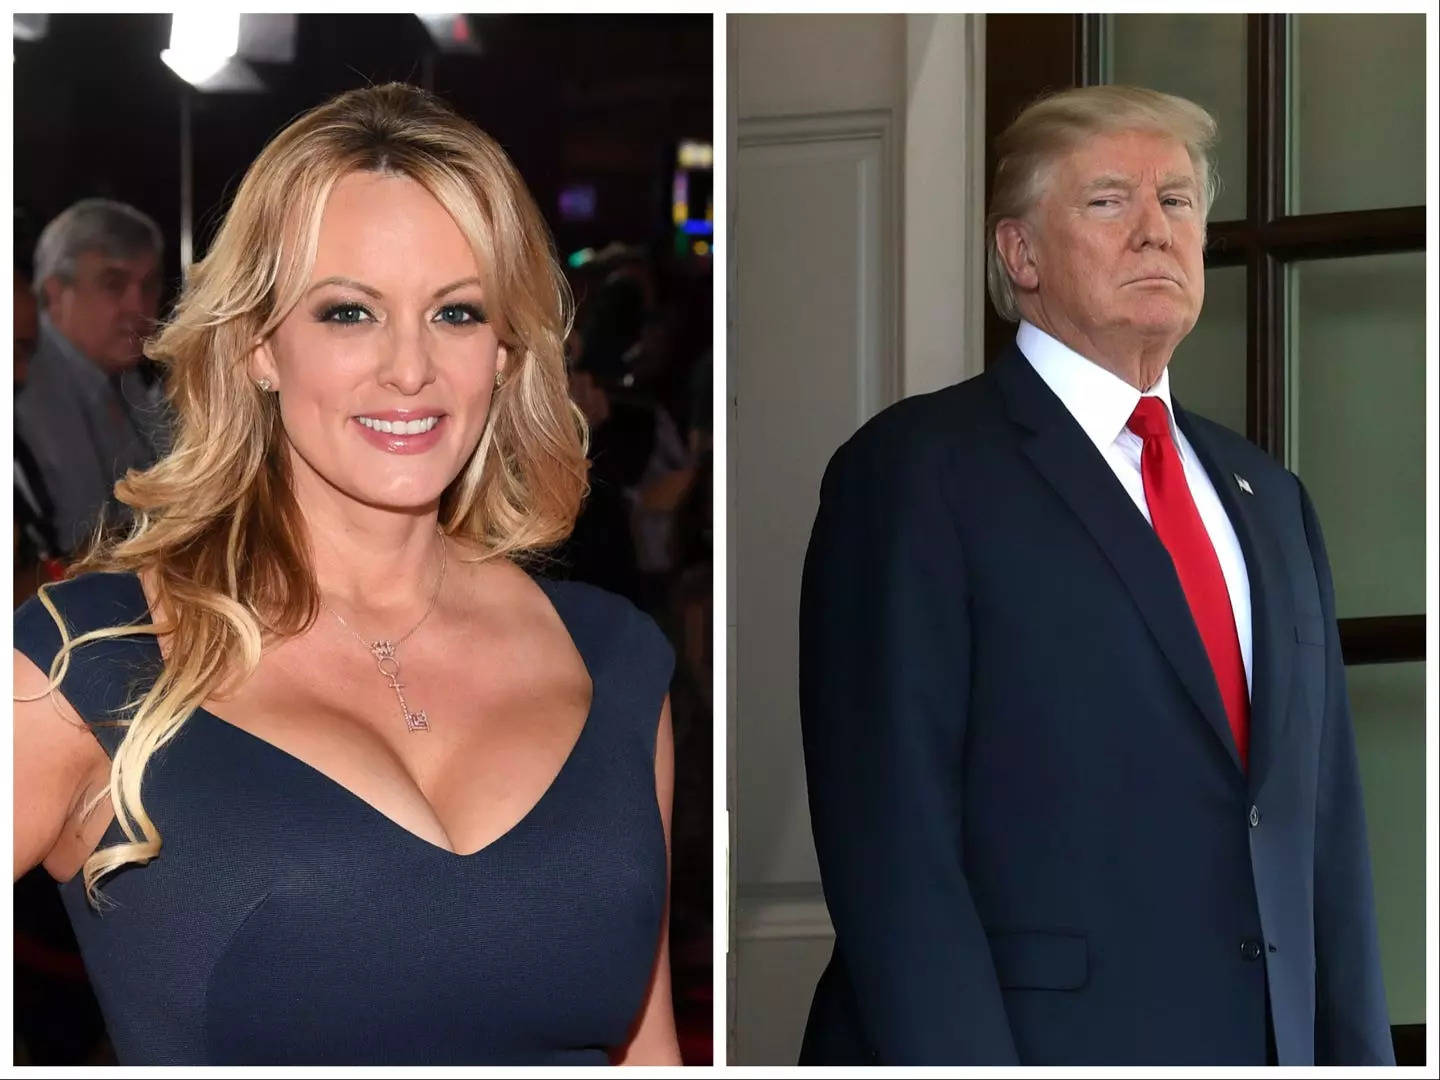 A composite image of adult actress Stormy Daniels (left) and former President Donald Trump (right).